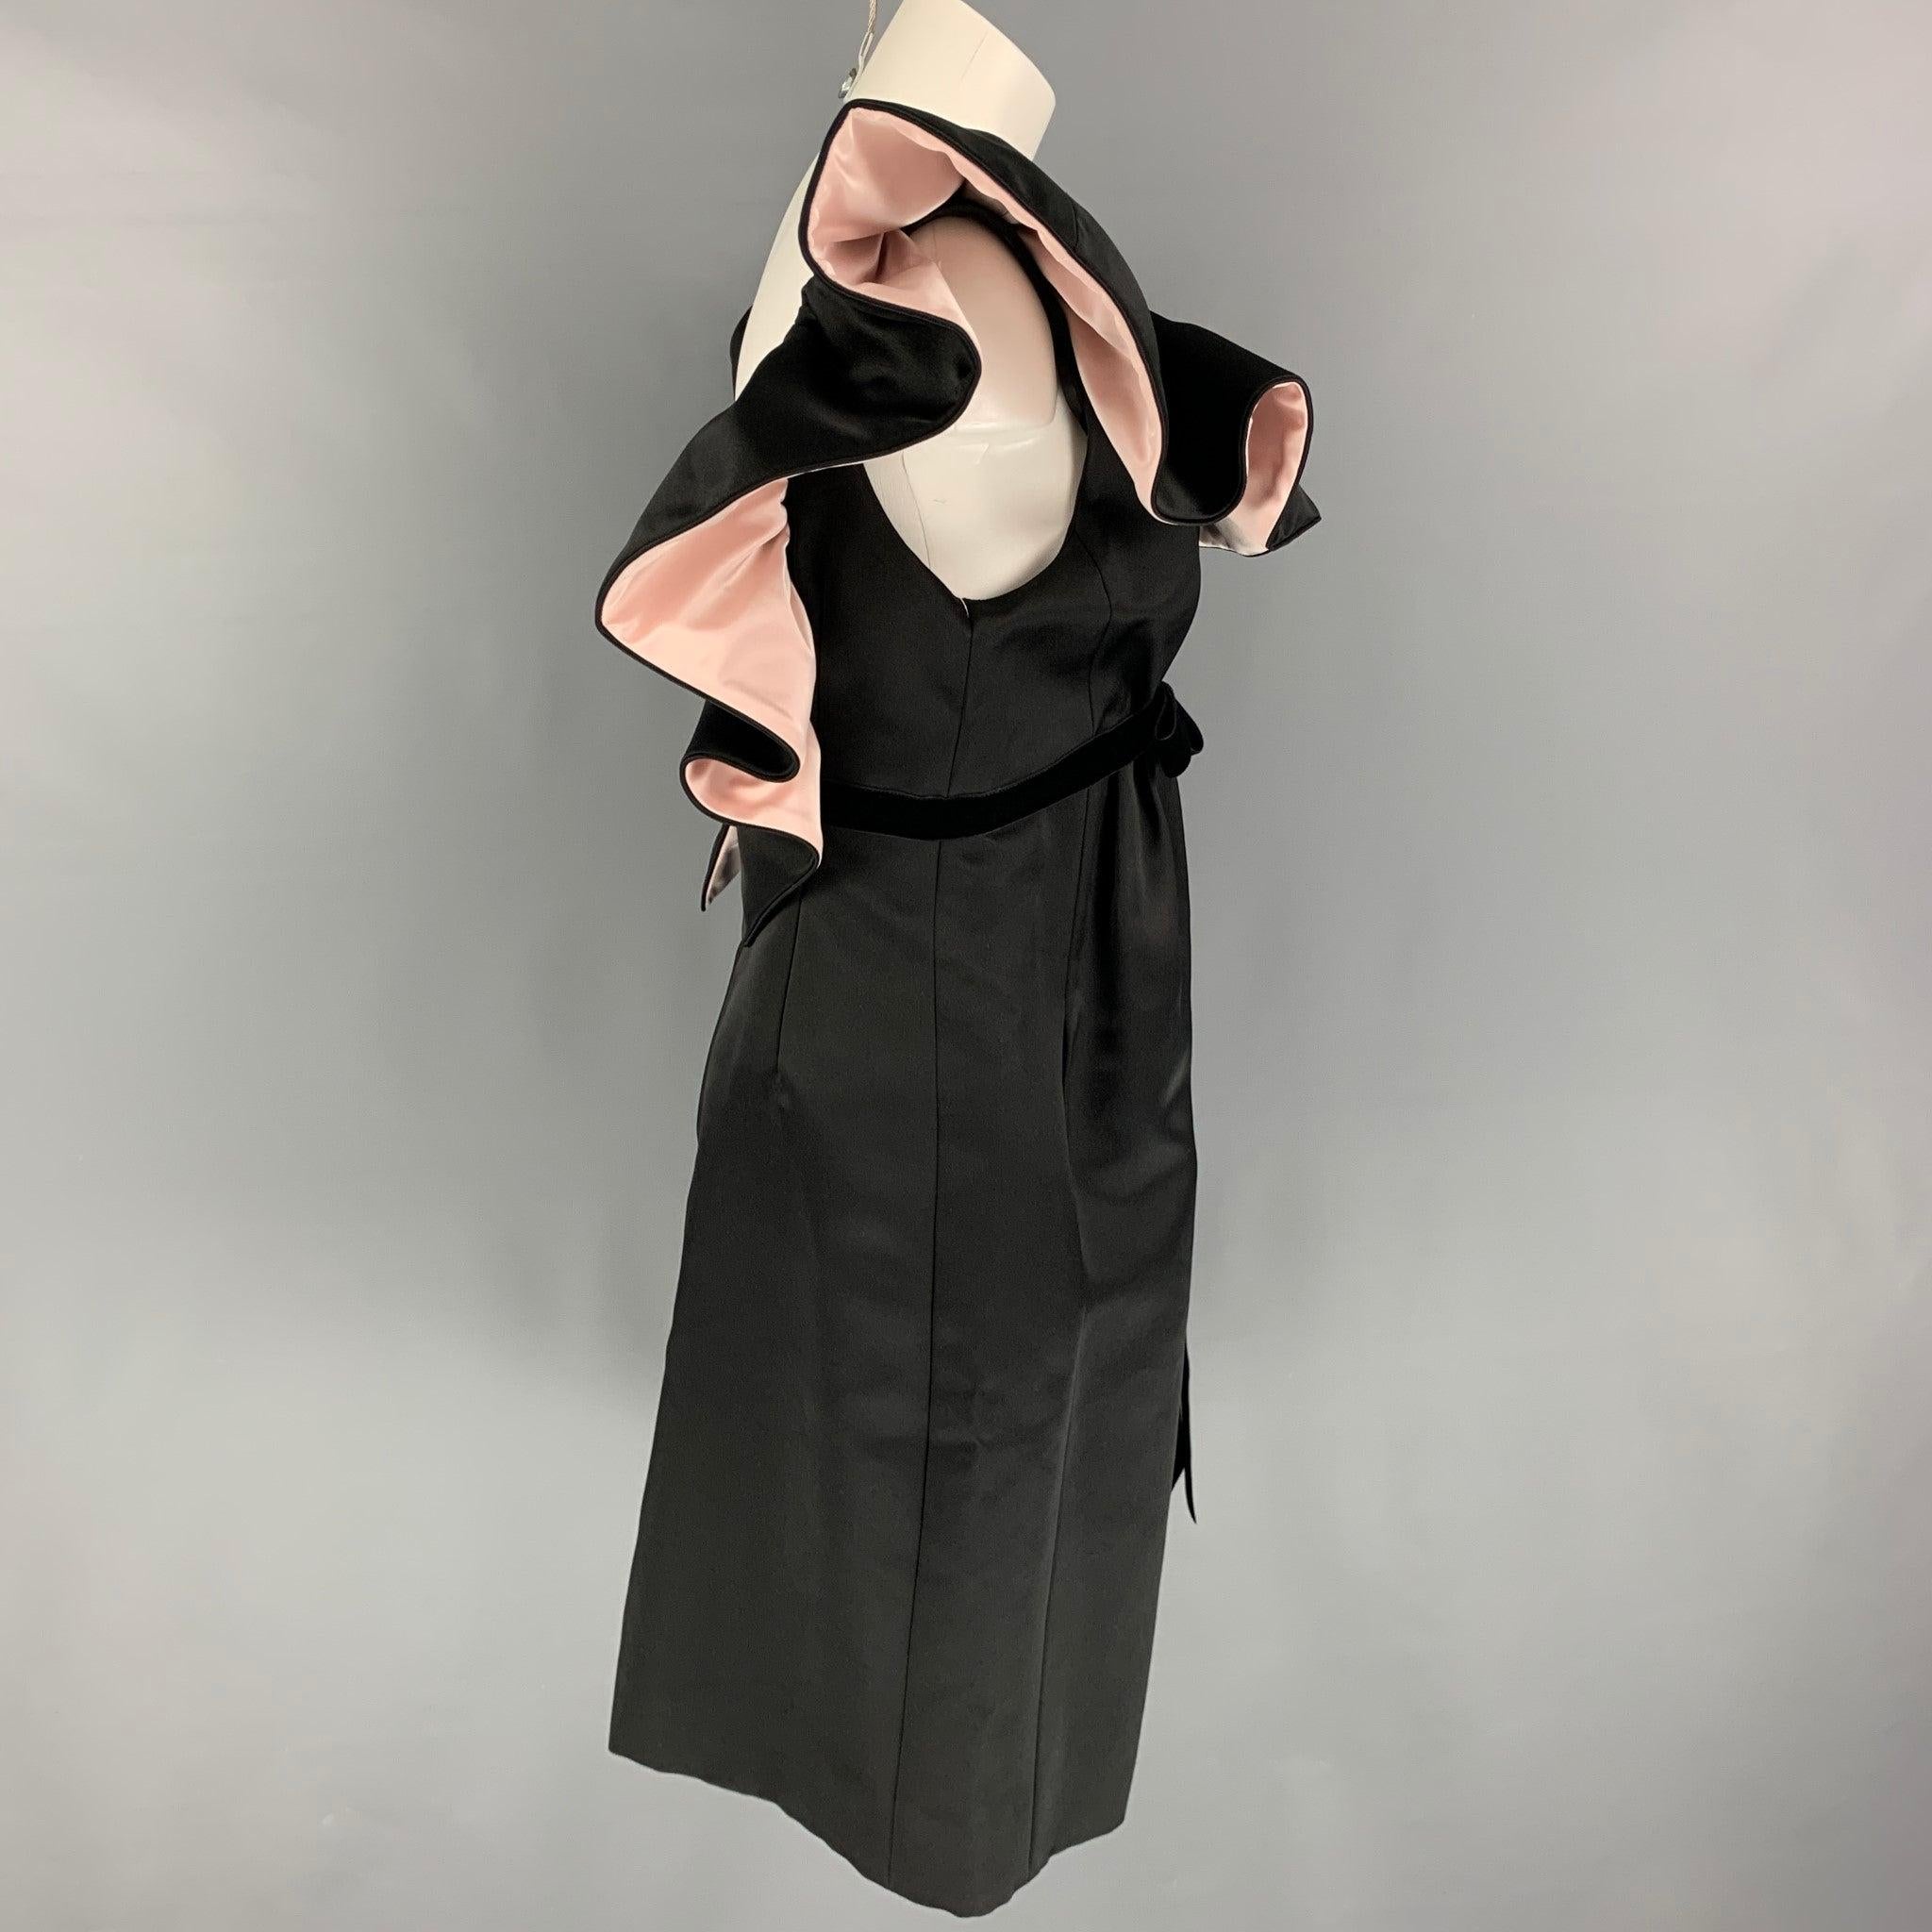 MARC JACOBS RUNWAY Size 6 Black Silk Pale Pink Low Back Dress In Good Condition For Sale In San Francisco, CA